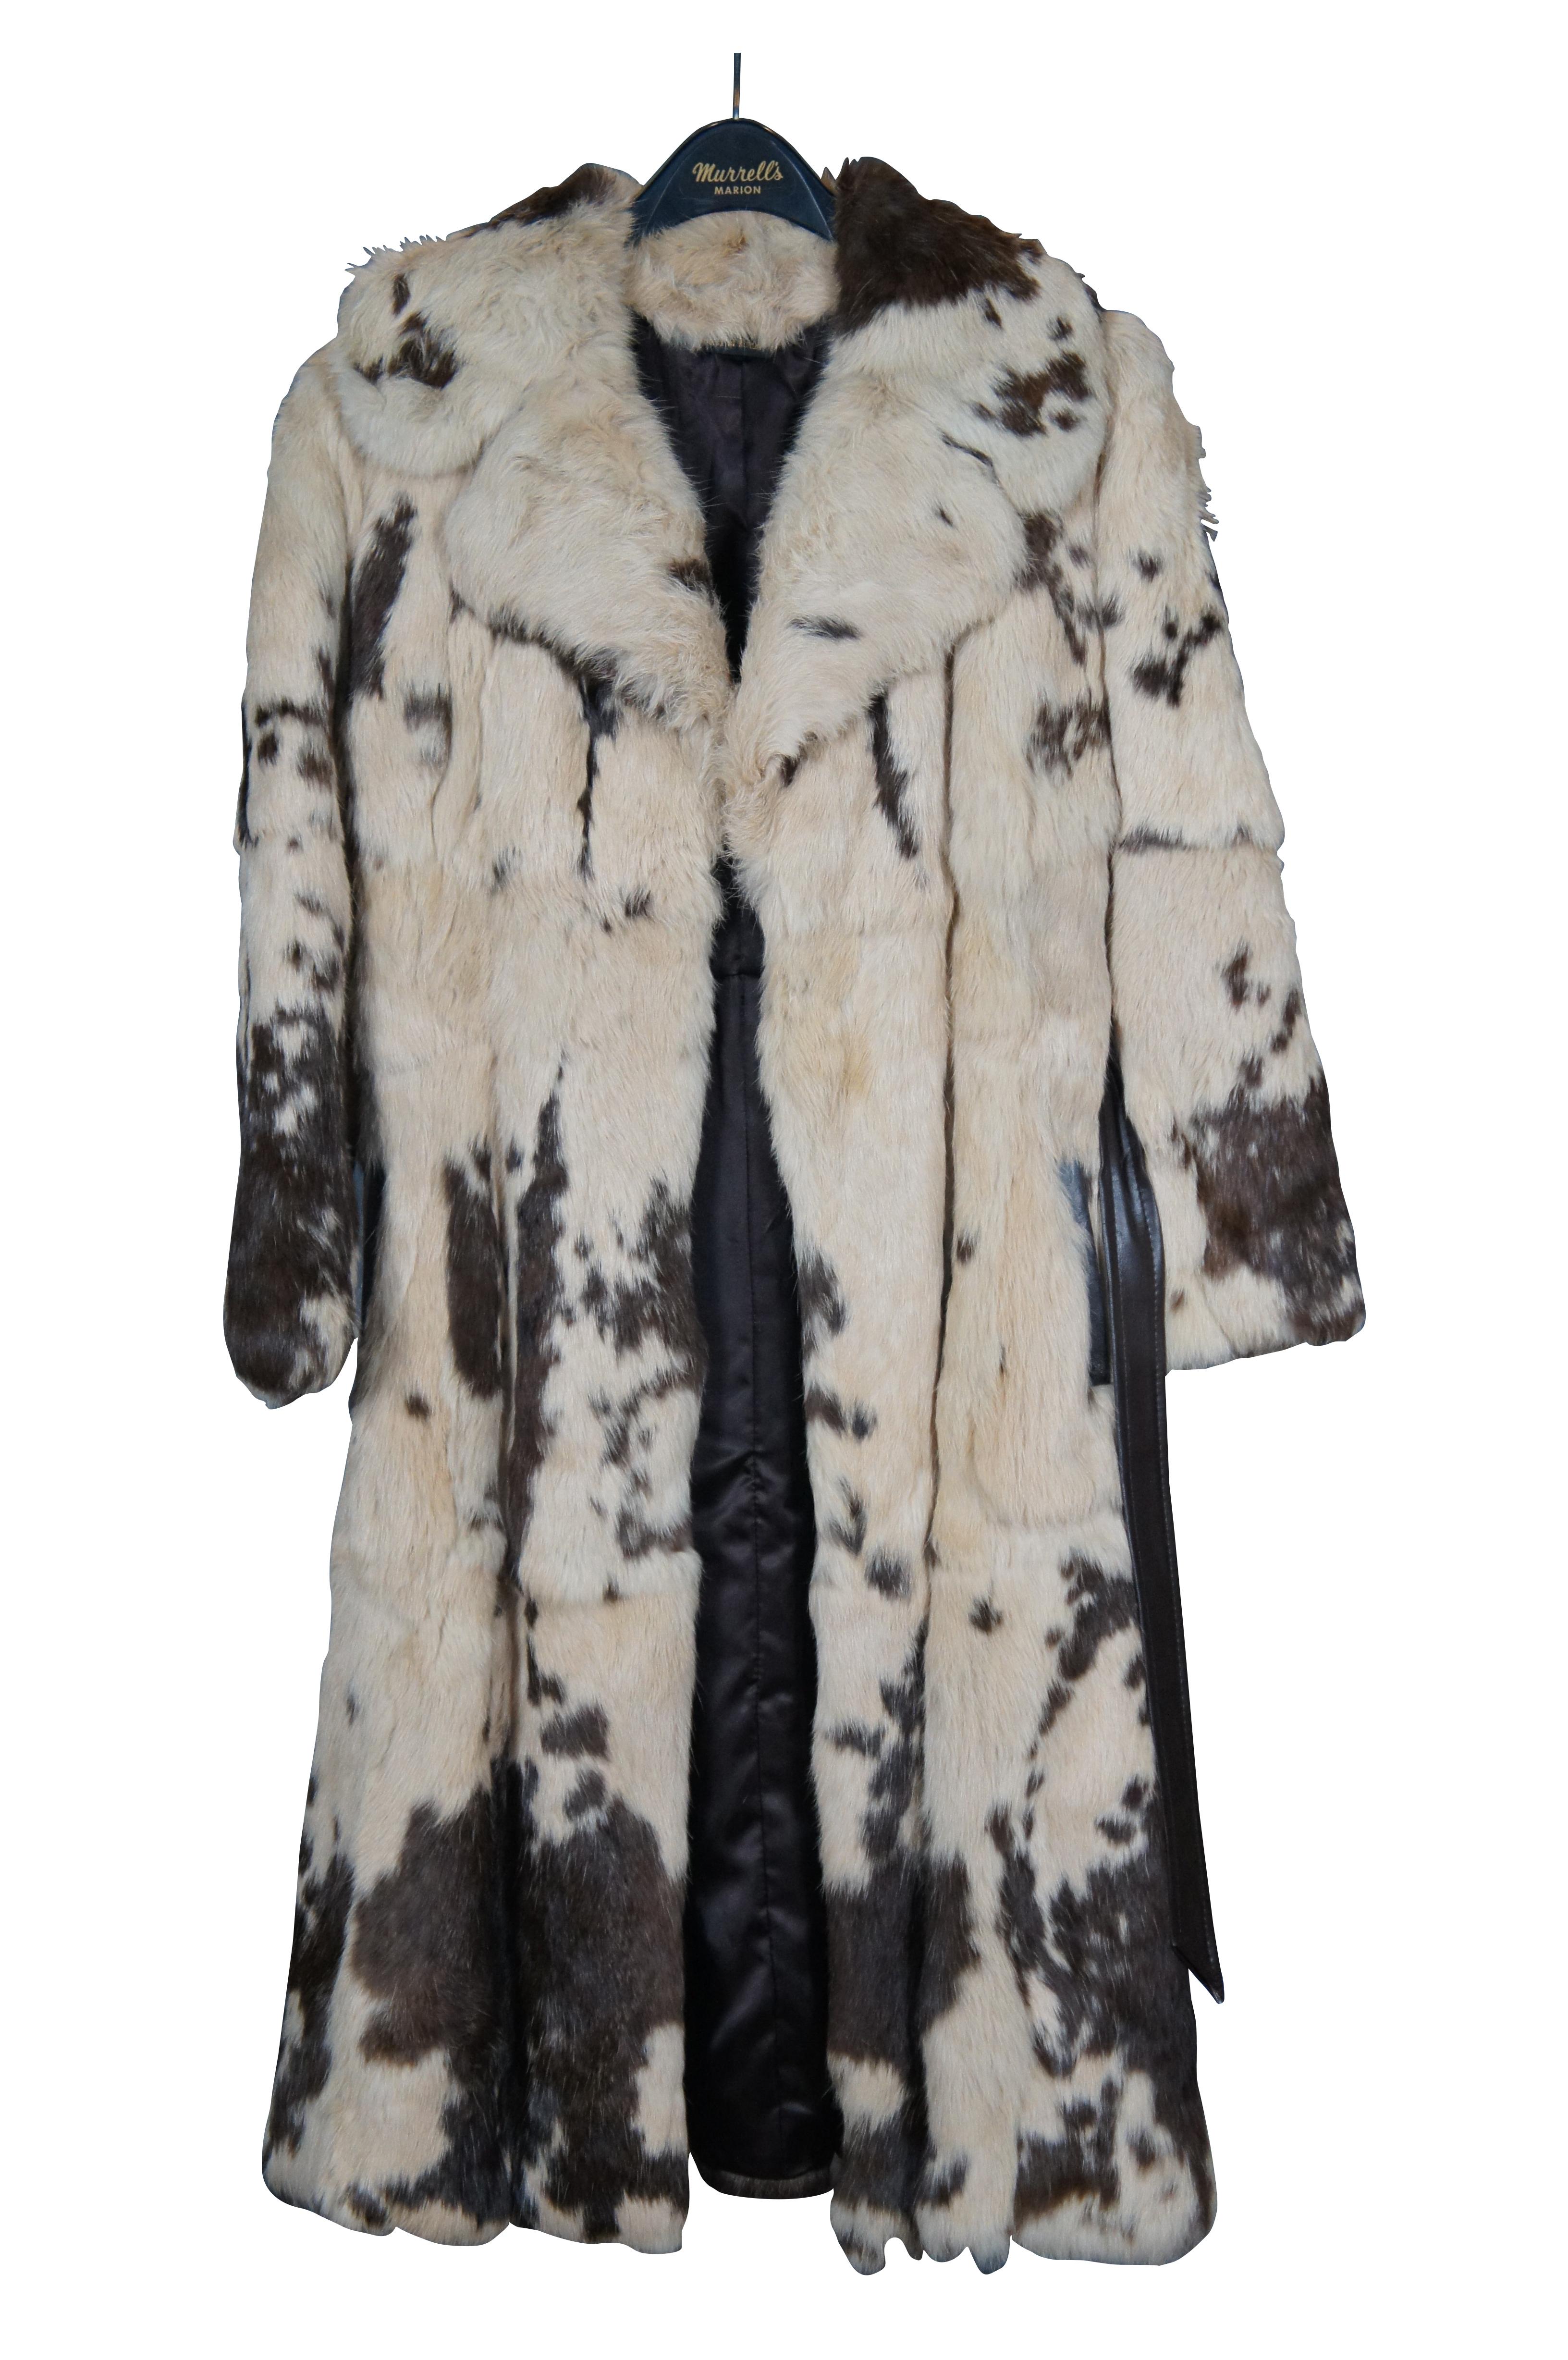 Vintage mid to late 20th century women's, full length, brown and white spotted cow hide fur coat, with leather belt and side pocket edges, and acetate satin lining. Made in Korea.

Shoulders - 19” / Arm Length - 22” / Chest – 38” / Back Length –